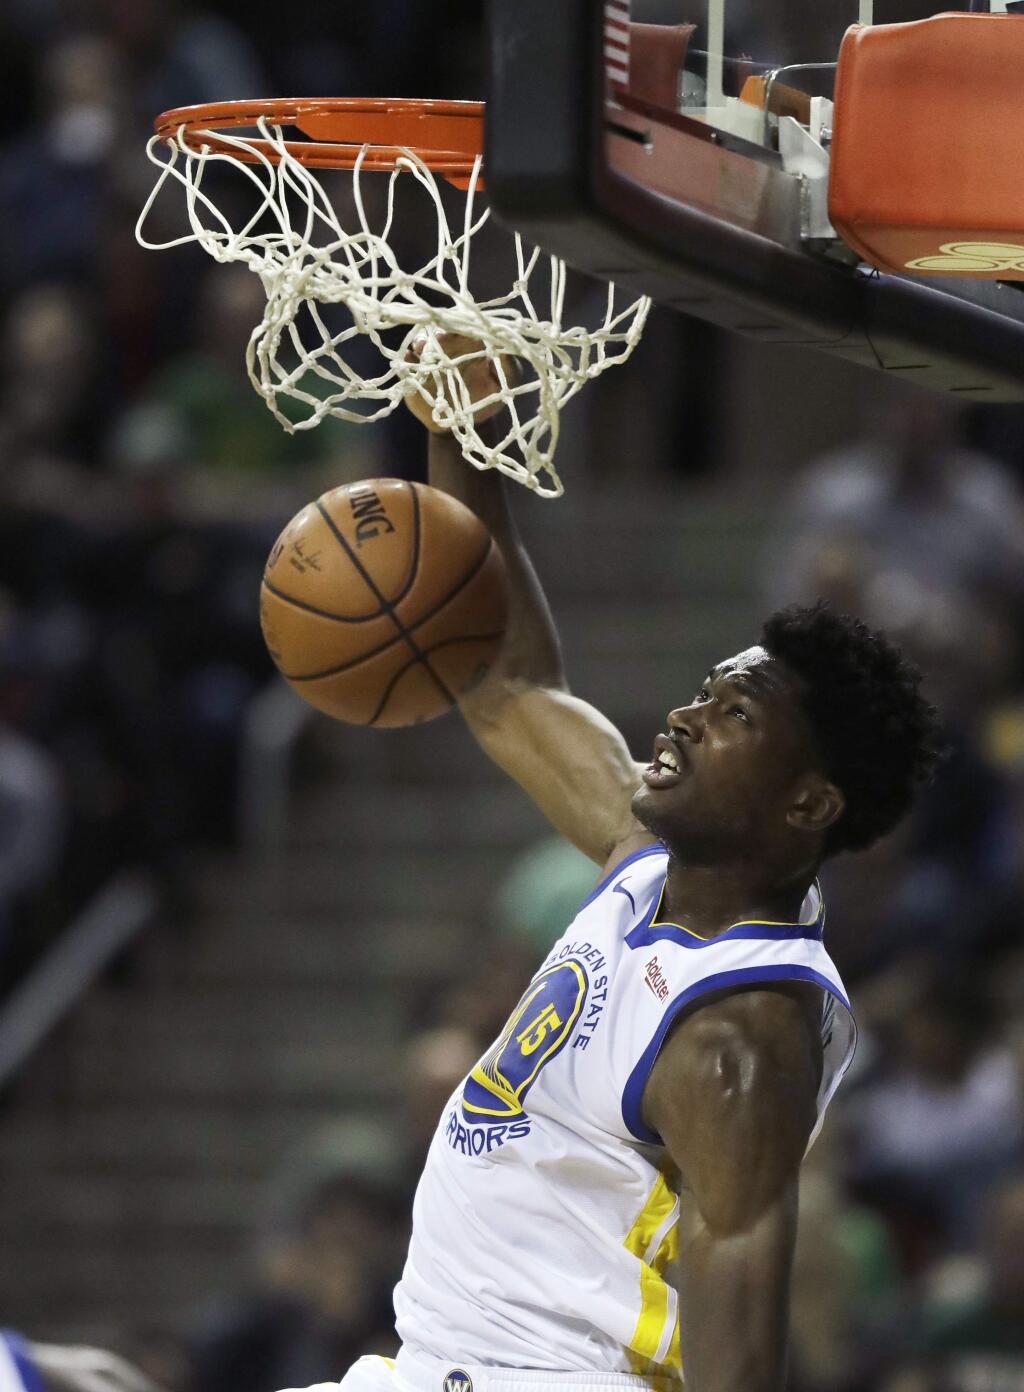 Golden State Warriors center Damian Jones dunks against the Sacramento Kings during the second half of a preseason game, Friday, Oct. 5, 2018, in Seattle. The Warriors won 122-94. (AP Photo/Ted S. Warren)